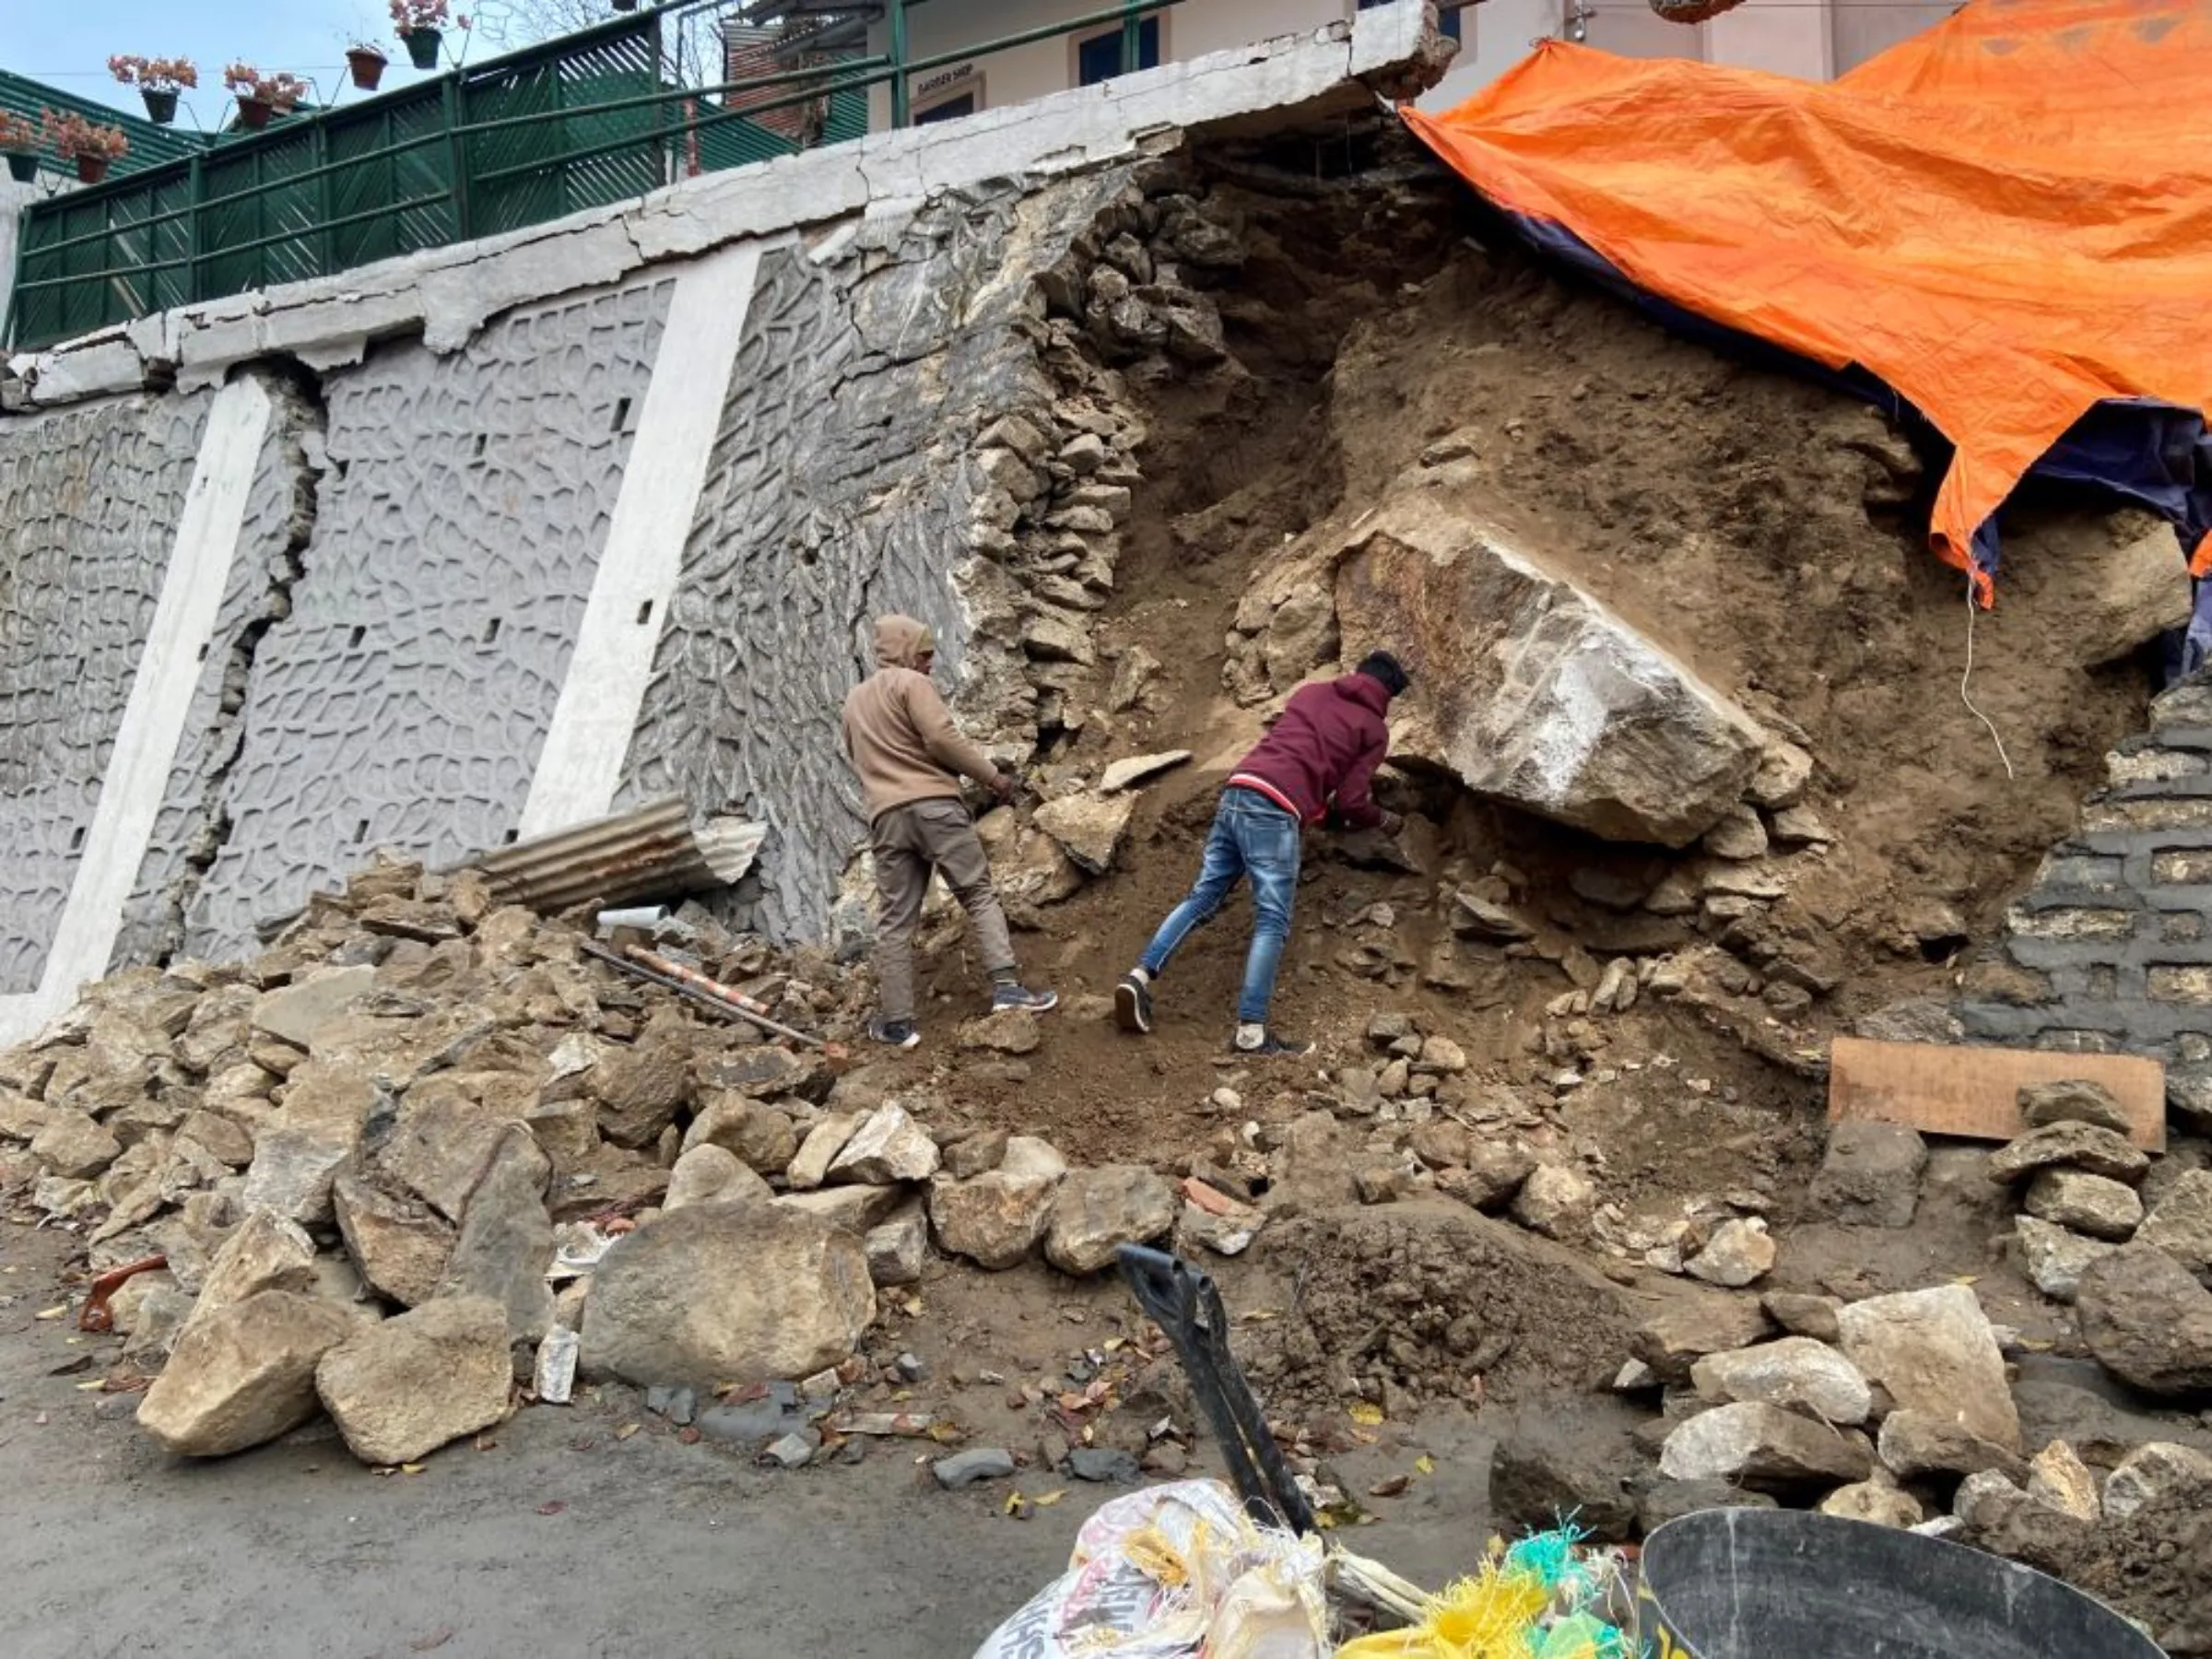 Workers remove debris from a massive crack in the wall of JP Colony in the Himalayan town of Joshimath, India, January 13, 2023